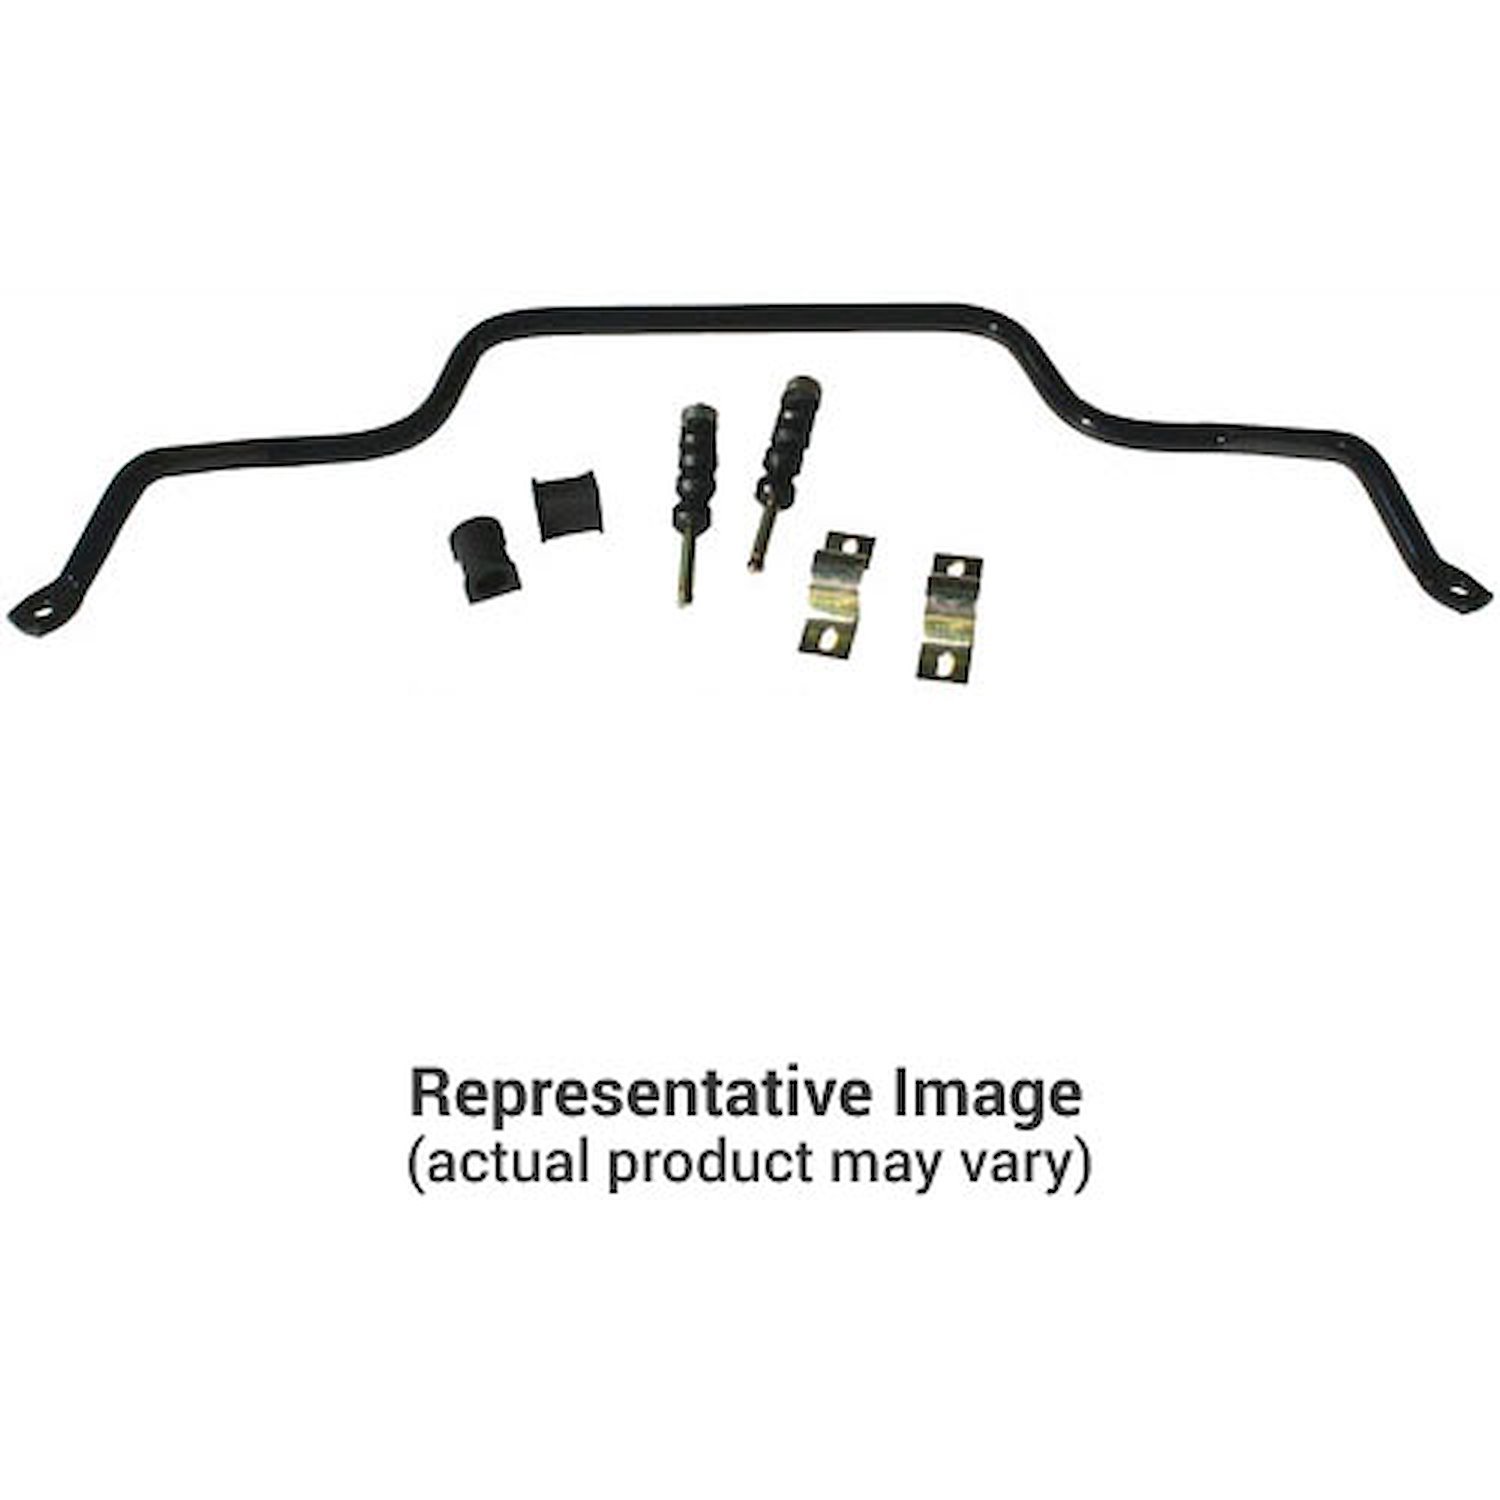 1 3/8" Front Sway Bar 2002-10 Dodge 2500/3500 2WD